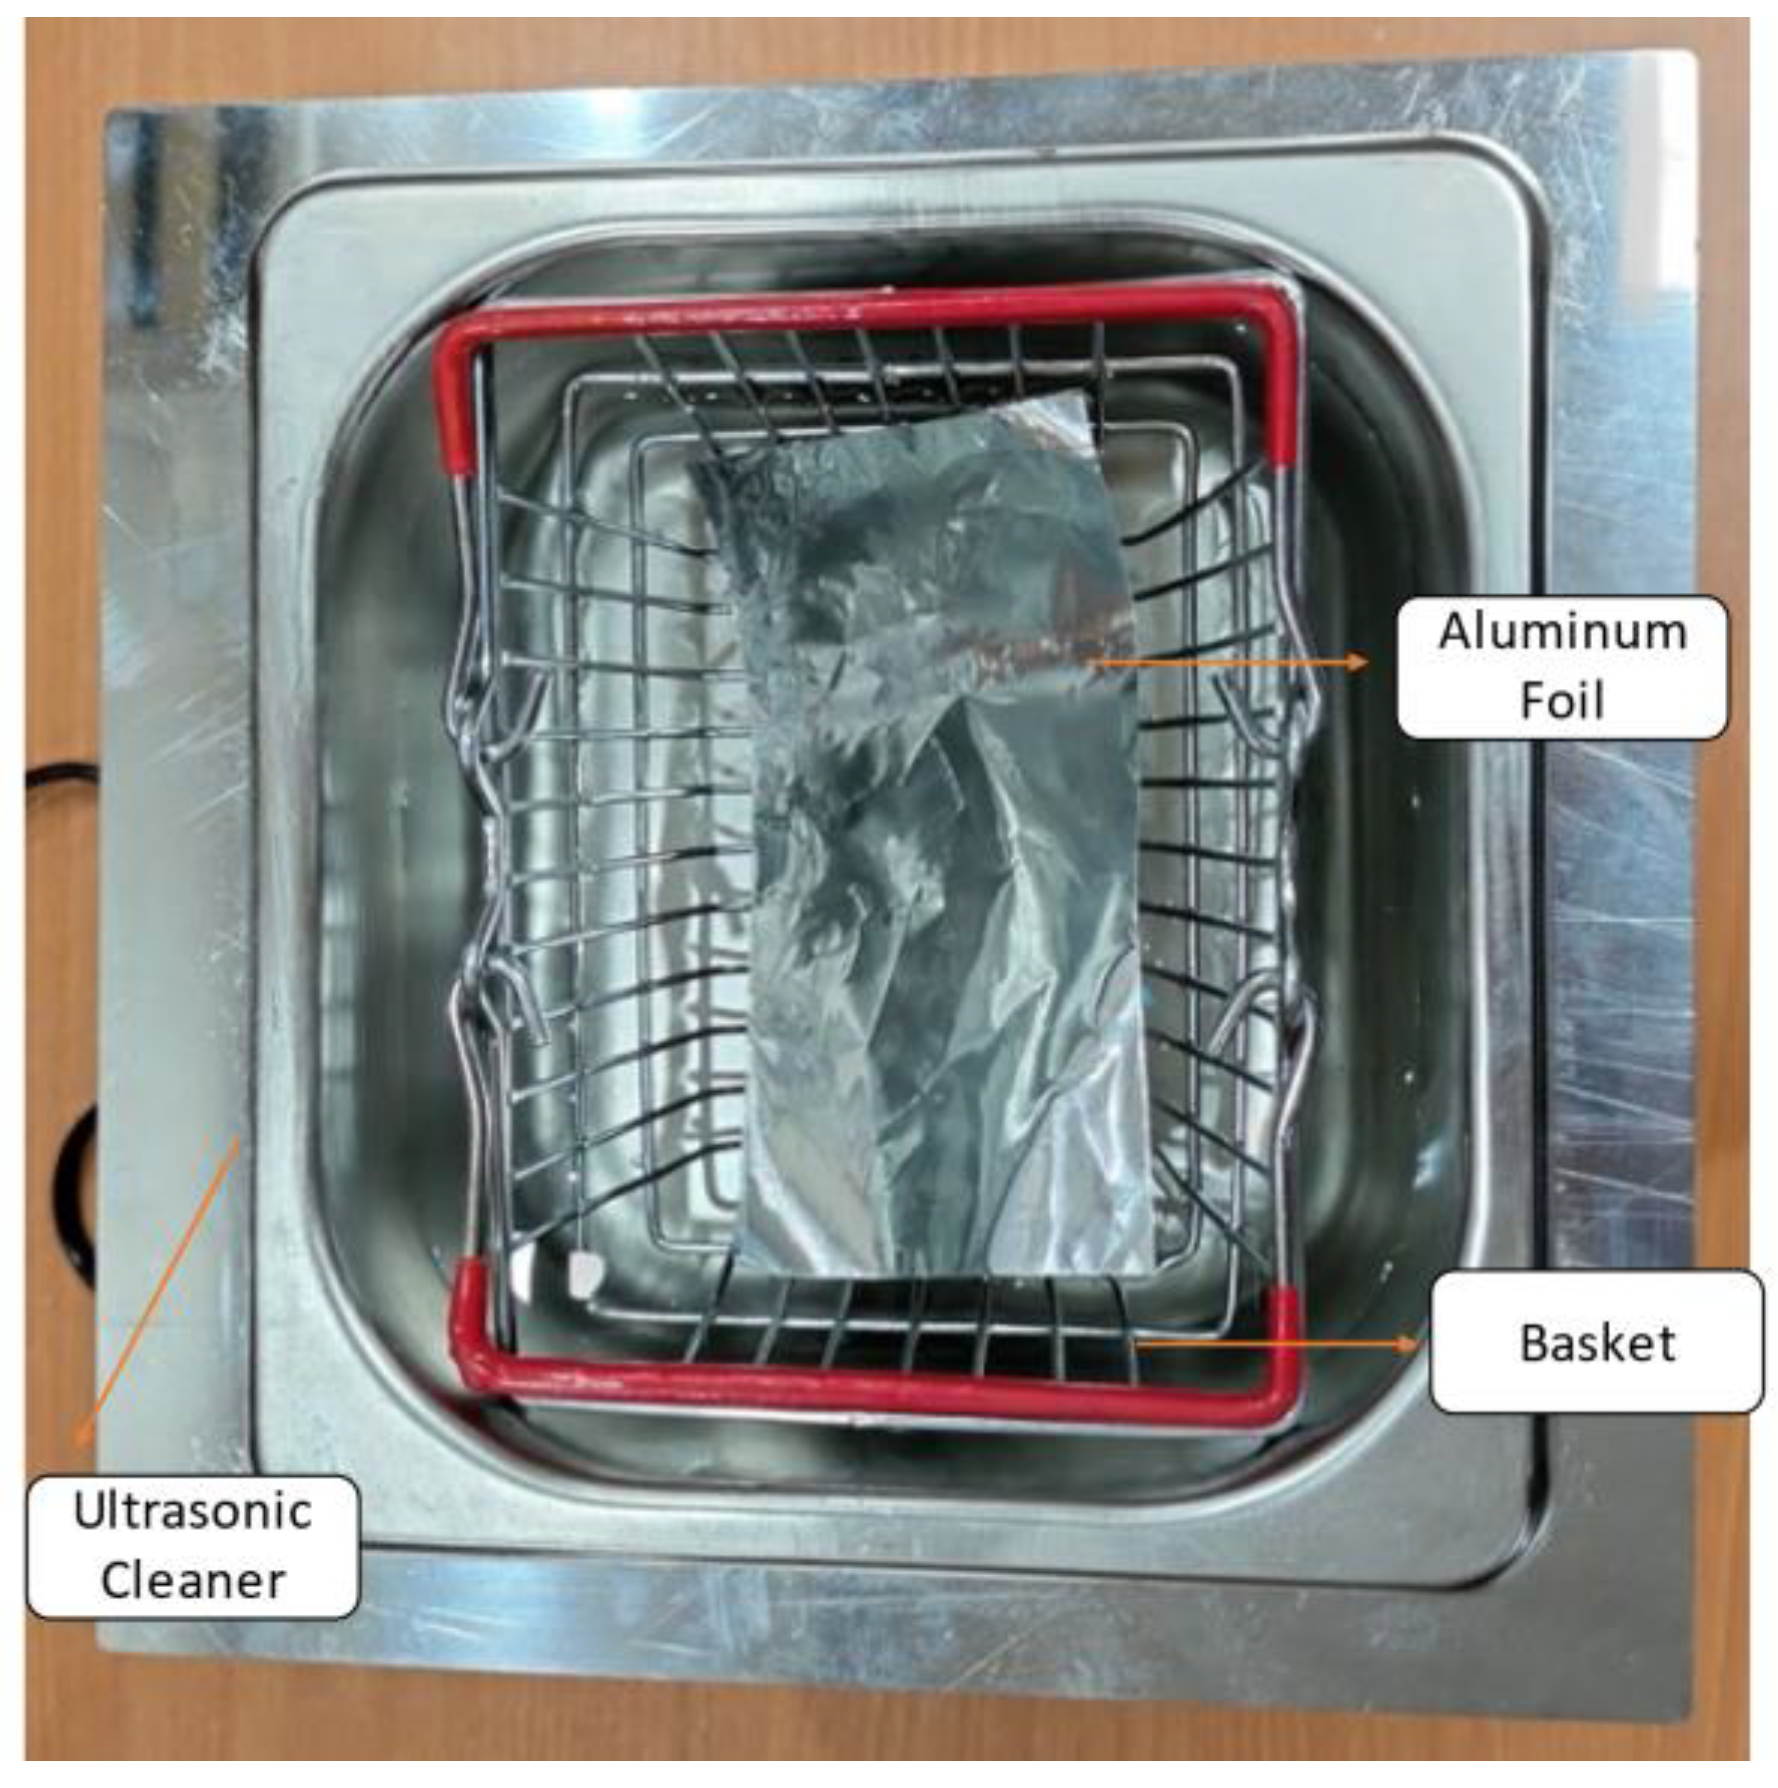 How to make a homemade ultrasonic cleaning solution by Jessie Wang